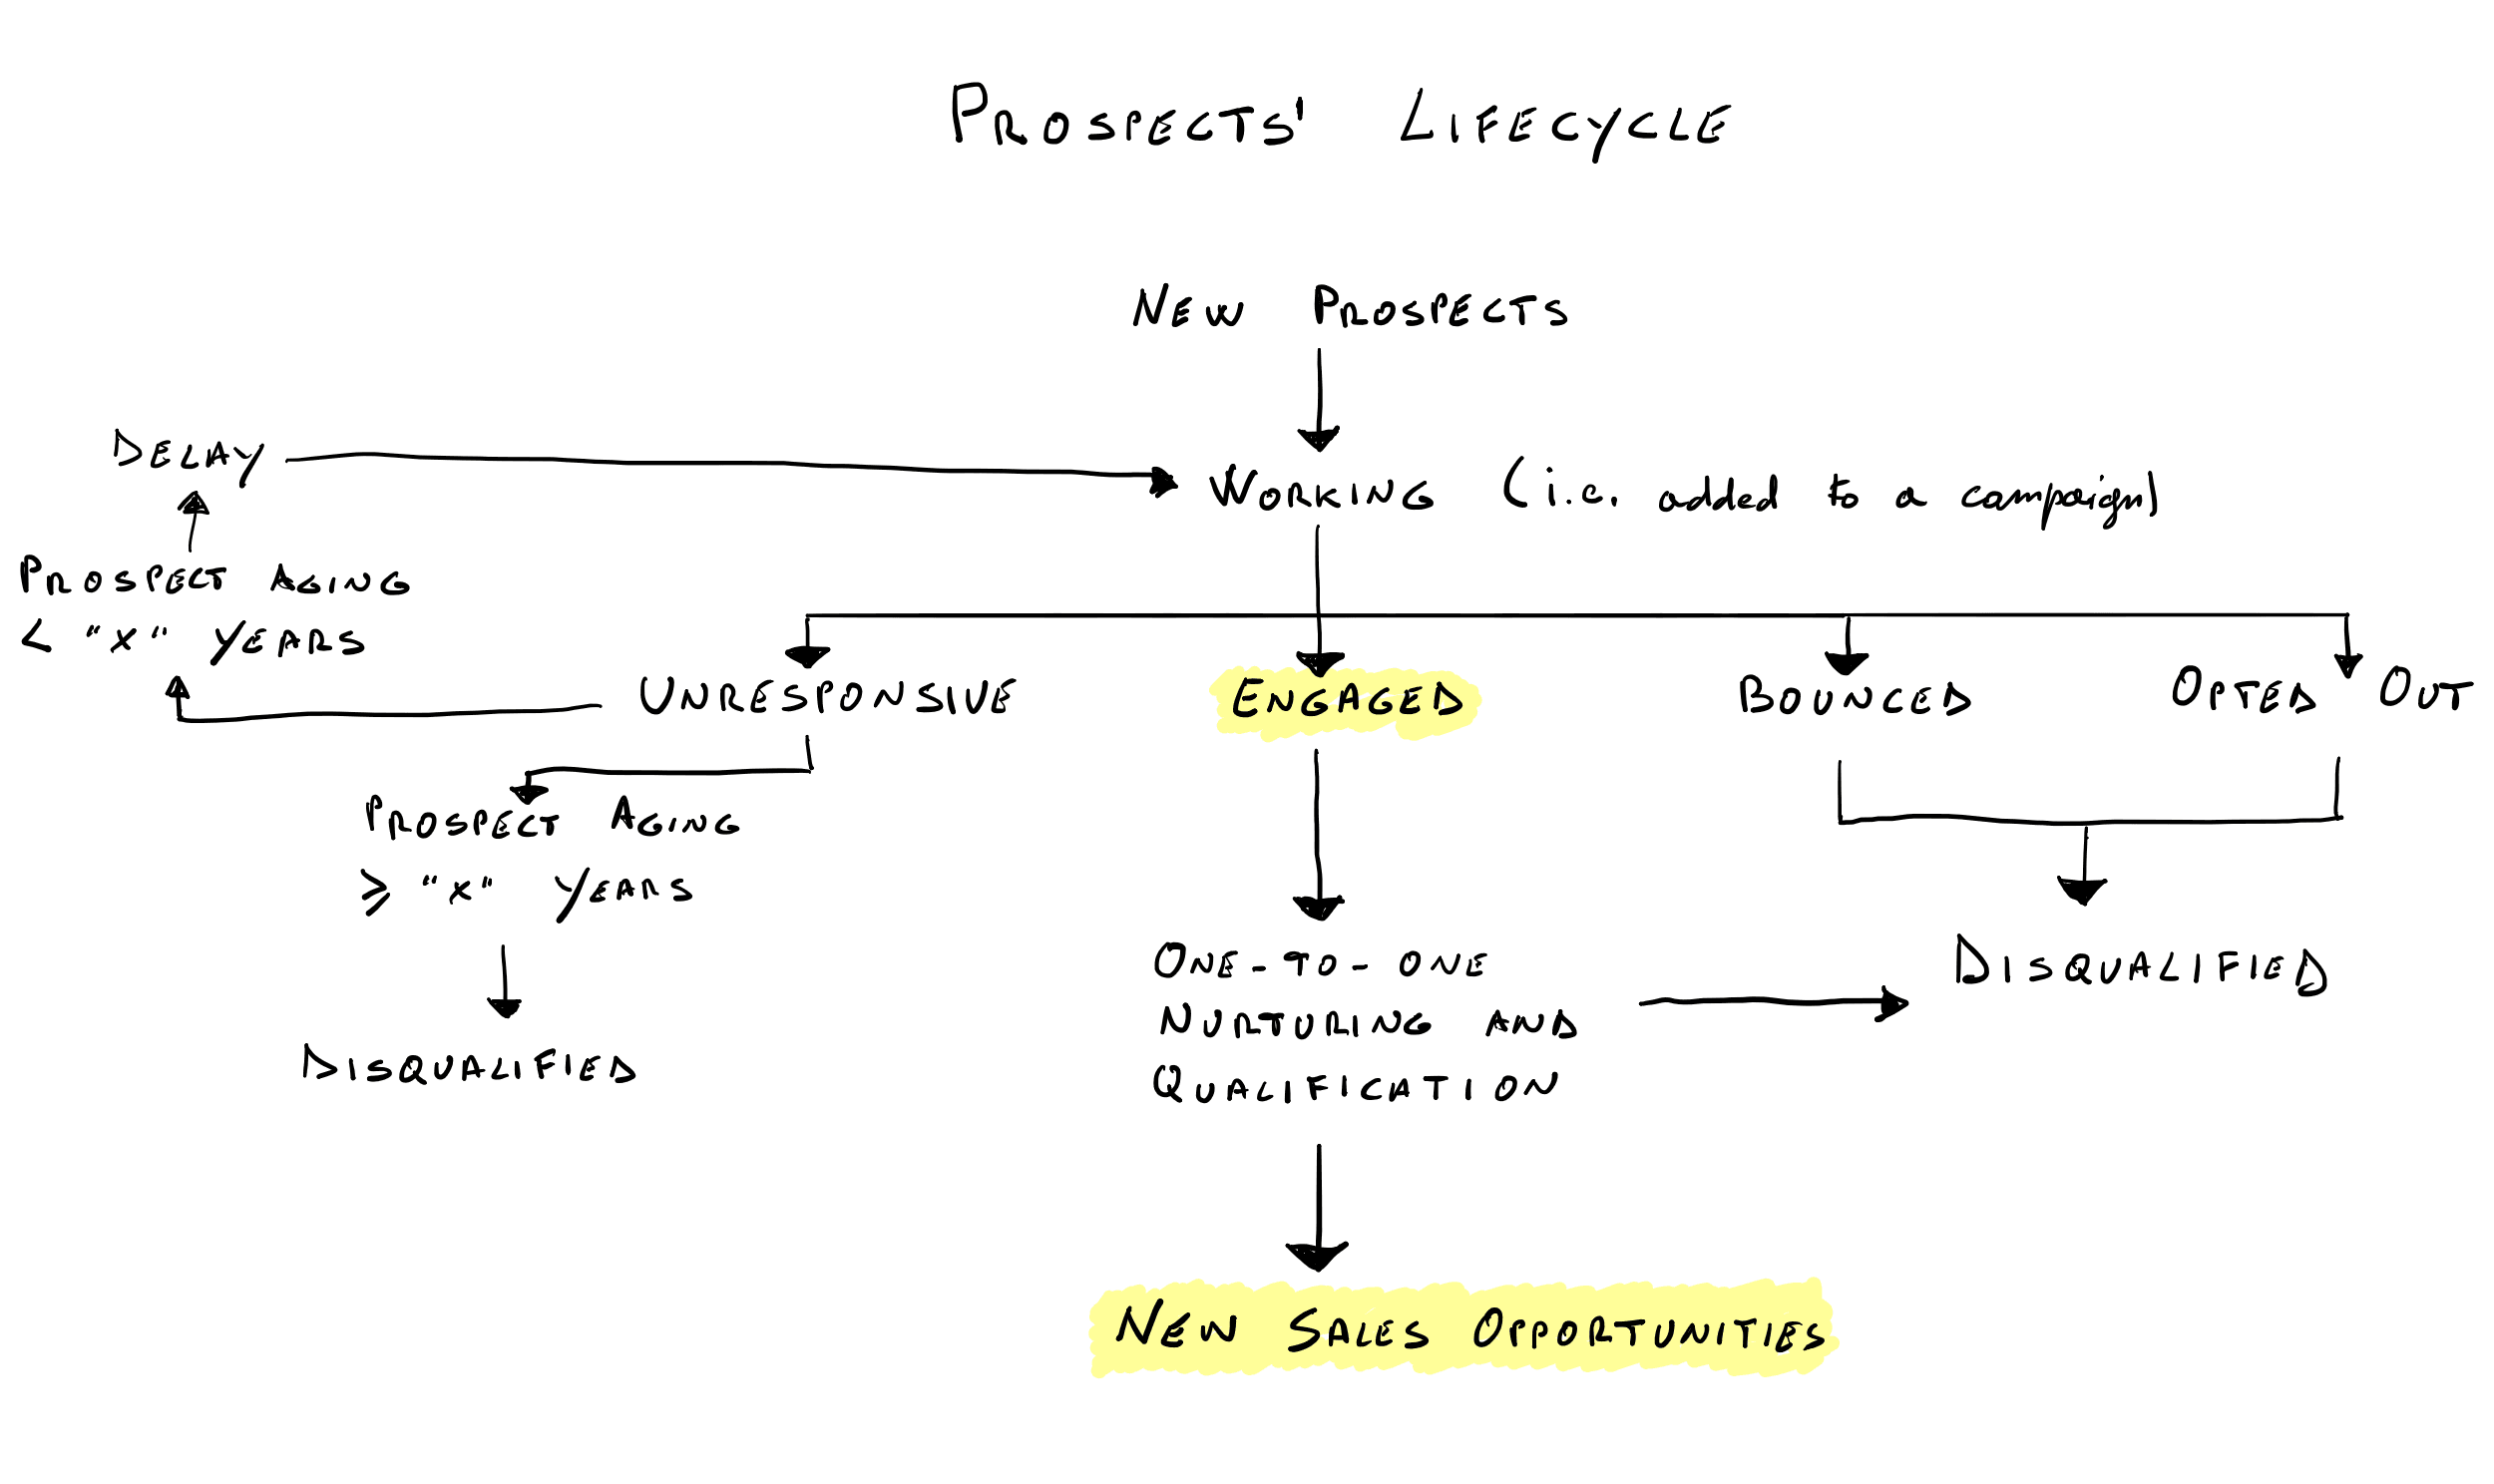 Prospects Lifecycle